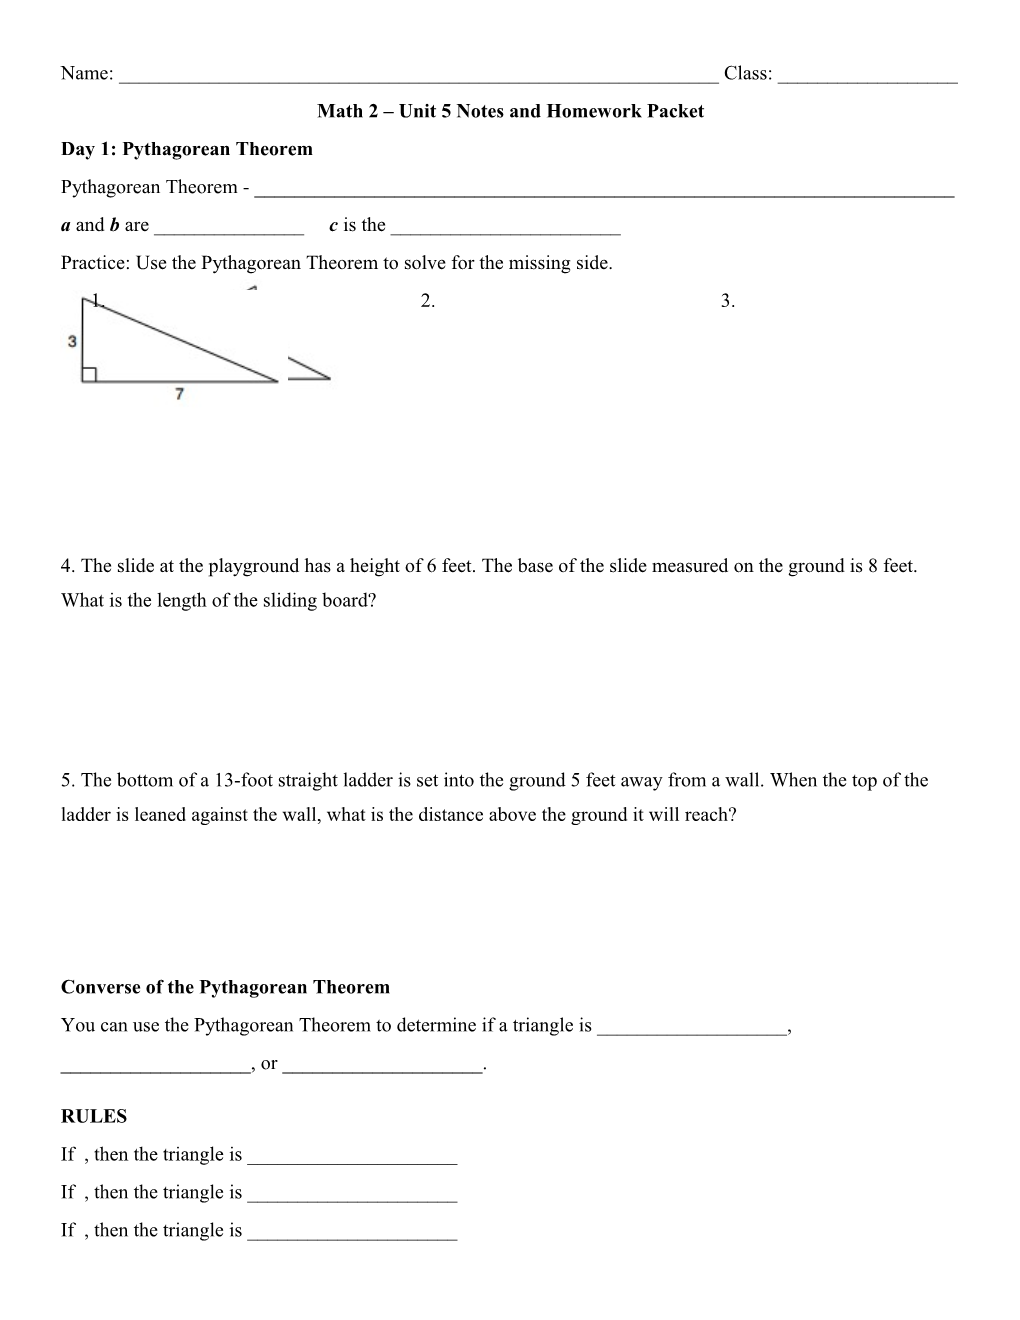 Math 2 Unit 5 Notes and Homework Packet